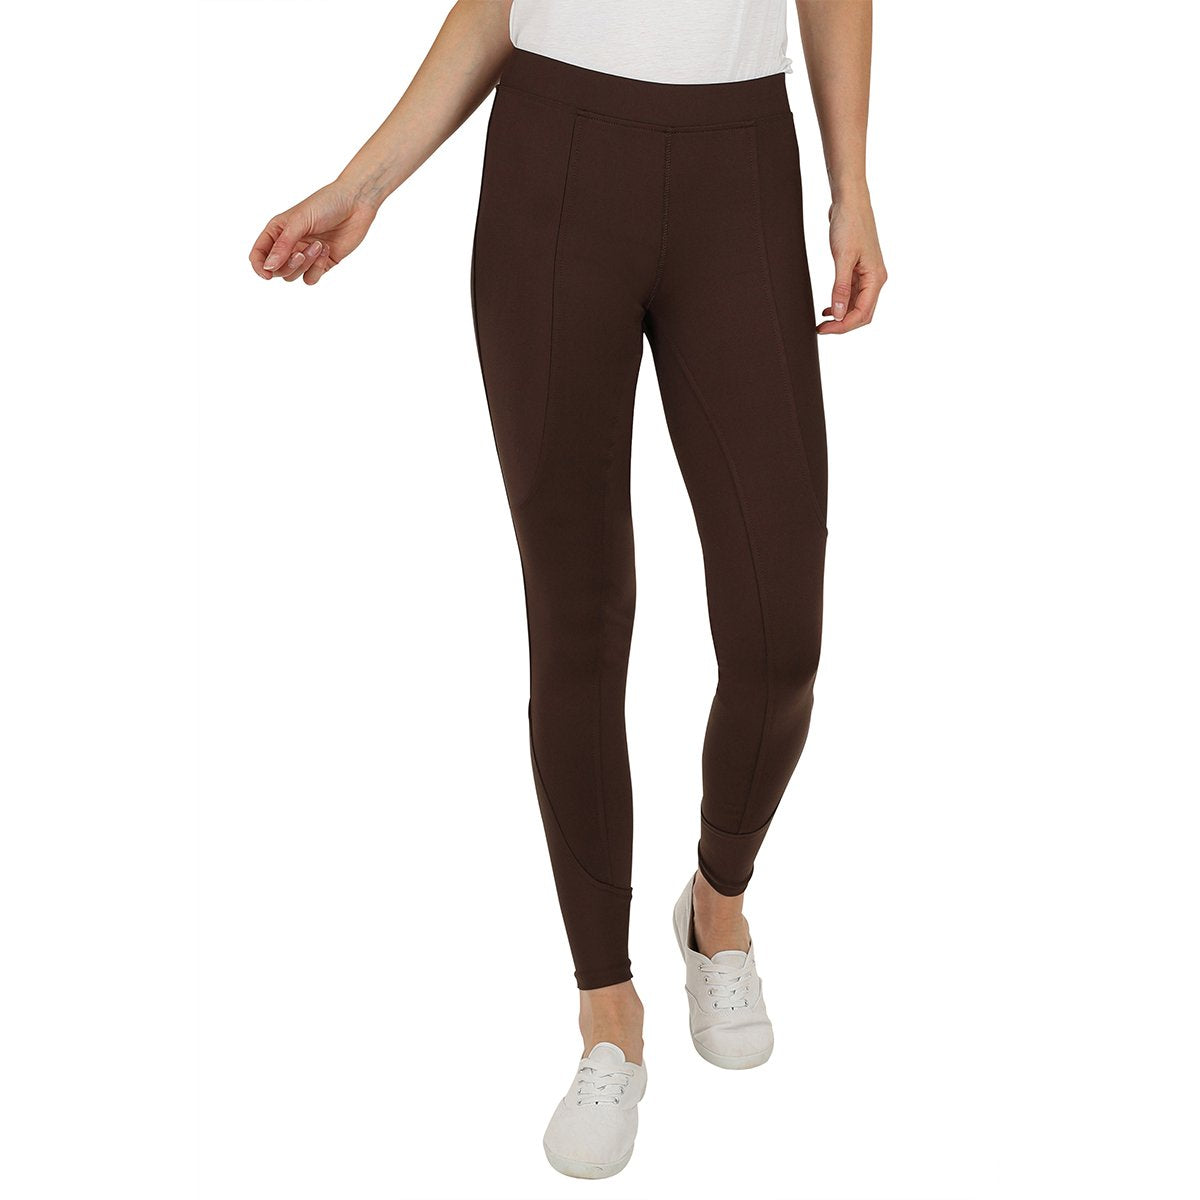 GS Equestrian Becca Ladies Silicone Riding Tights